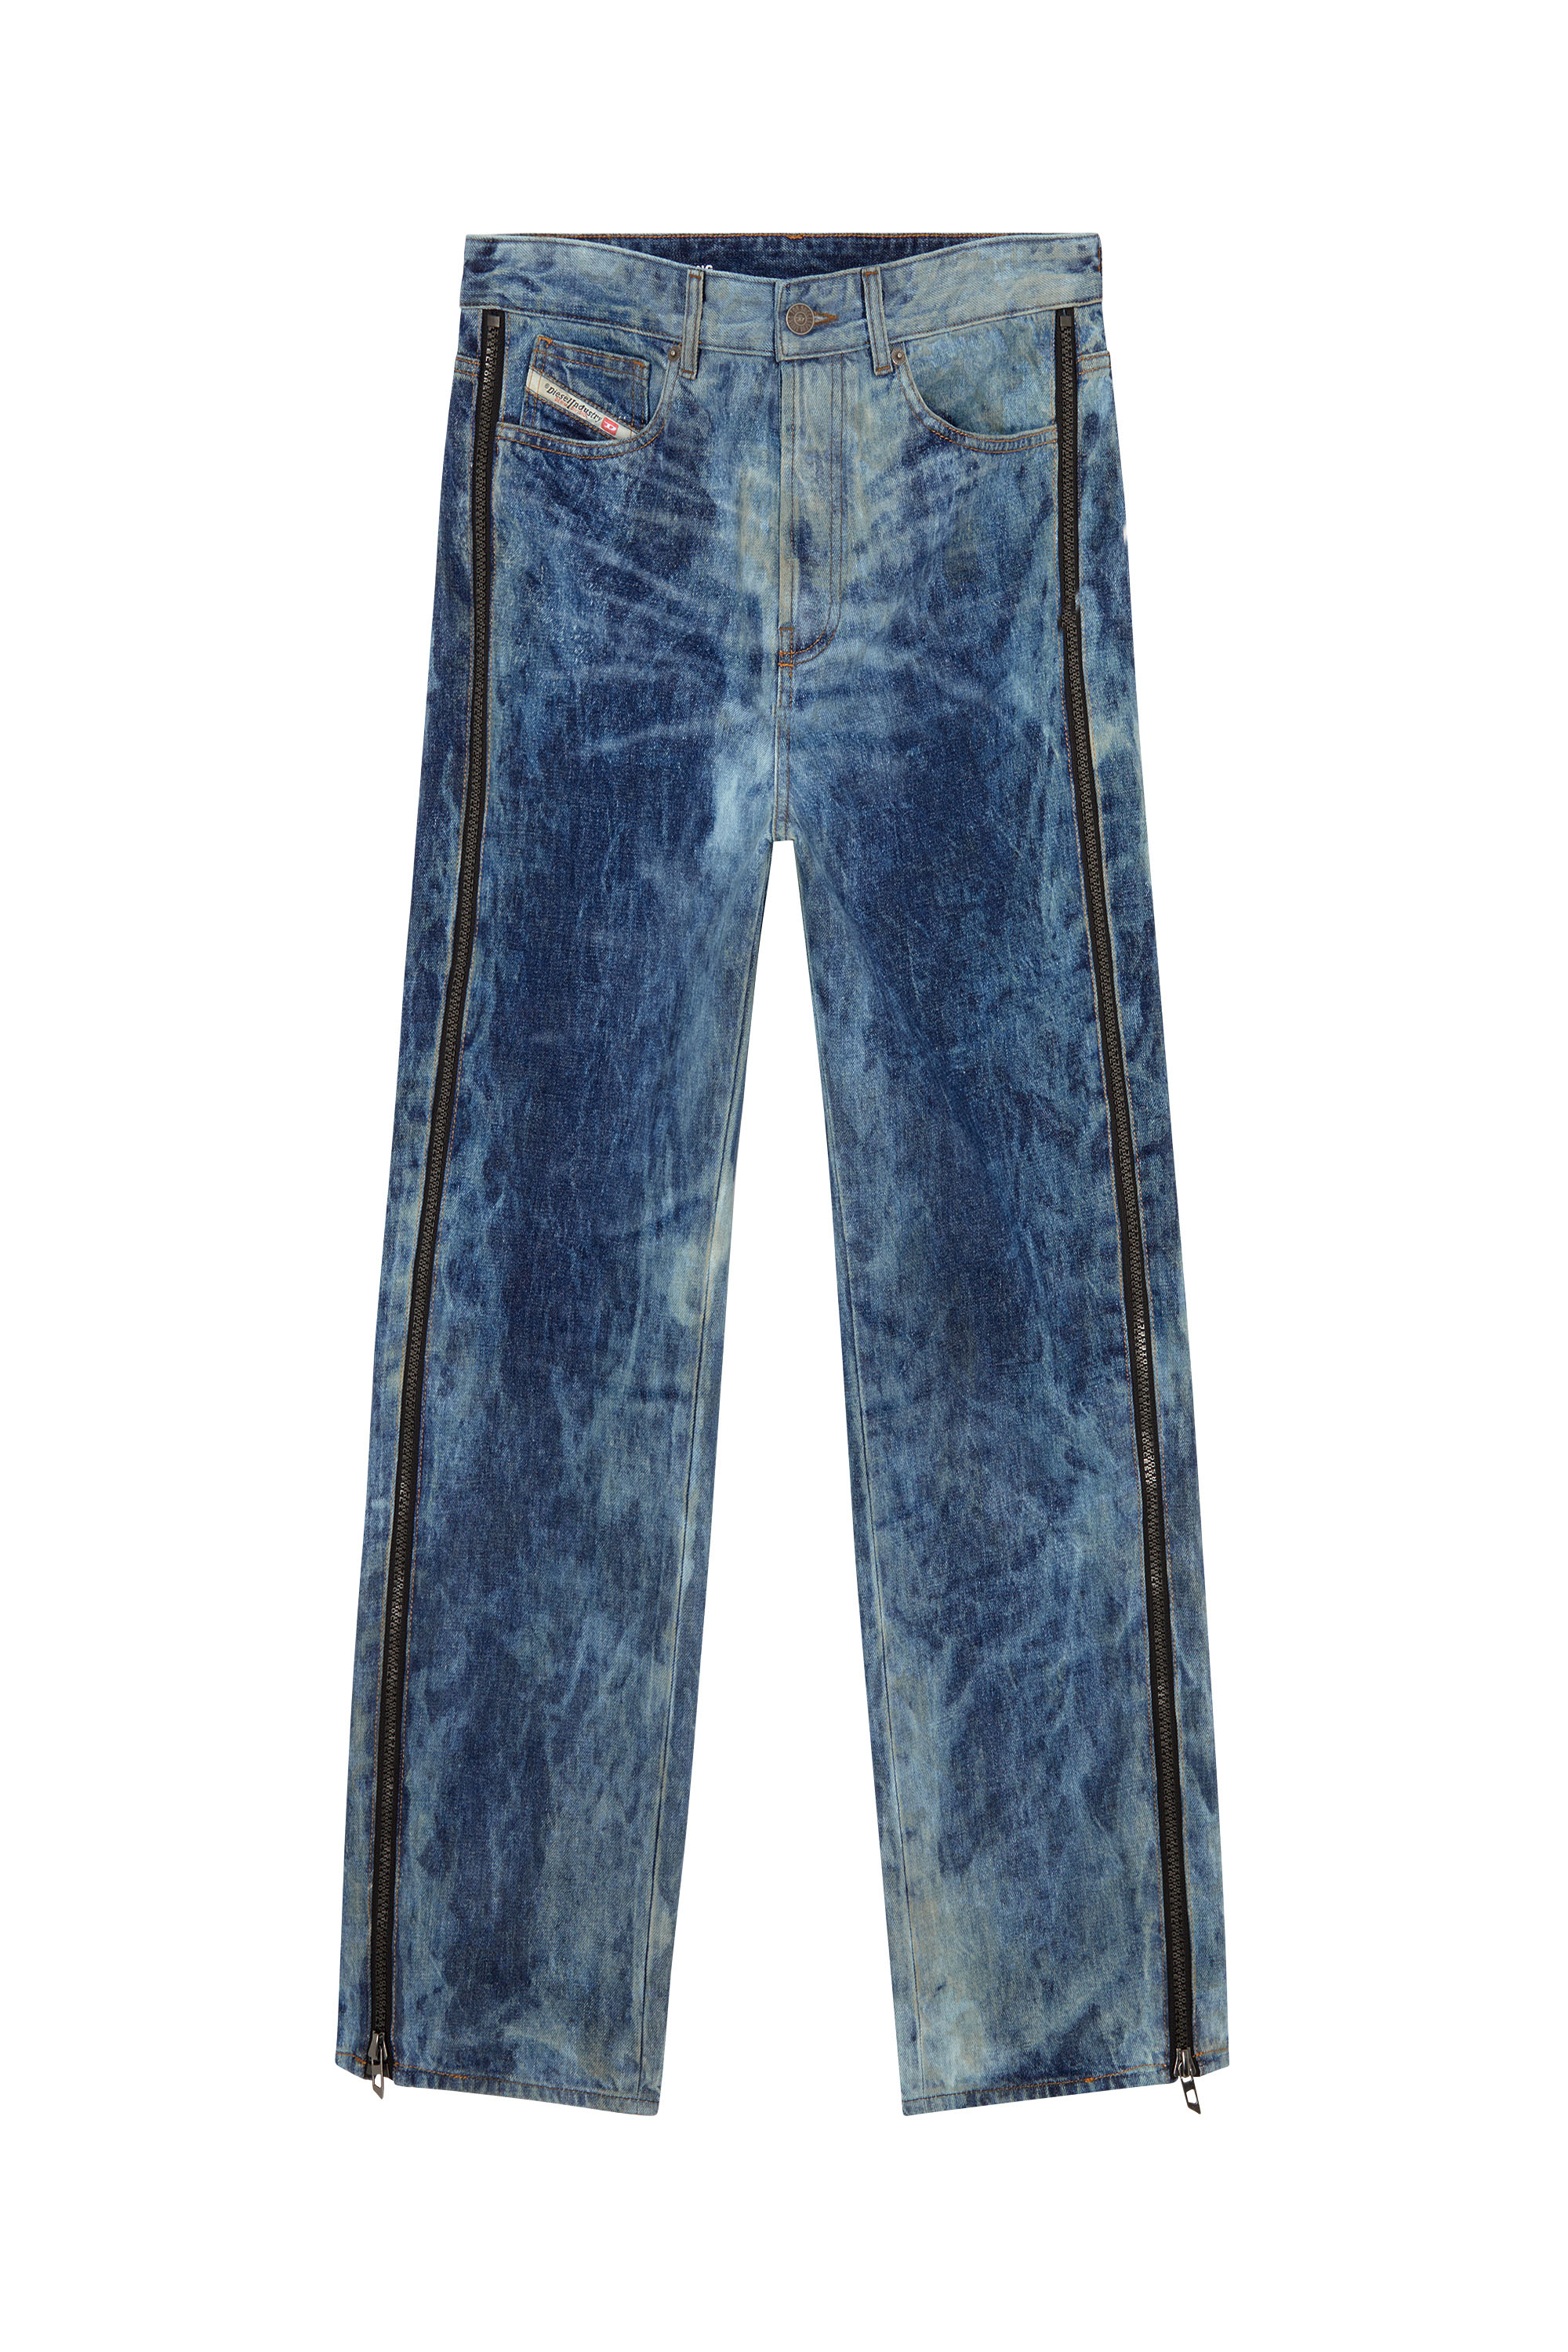 Diesel - Straight Jeans D-Rise 0PGAX, Hombre Straight Jeans - D-Rise in Azul marino - Image 3